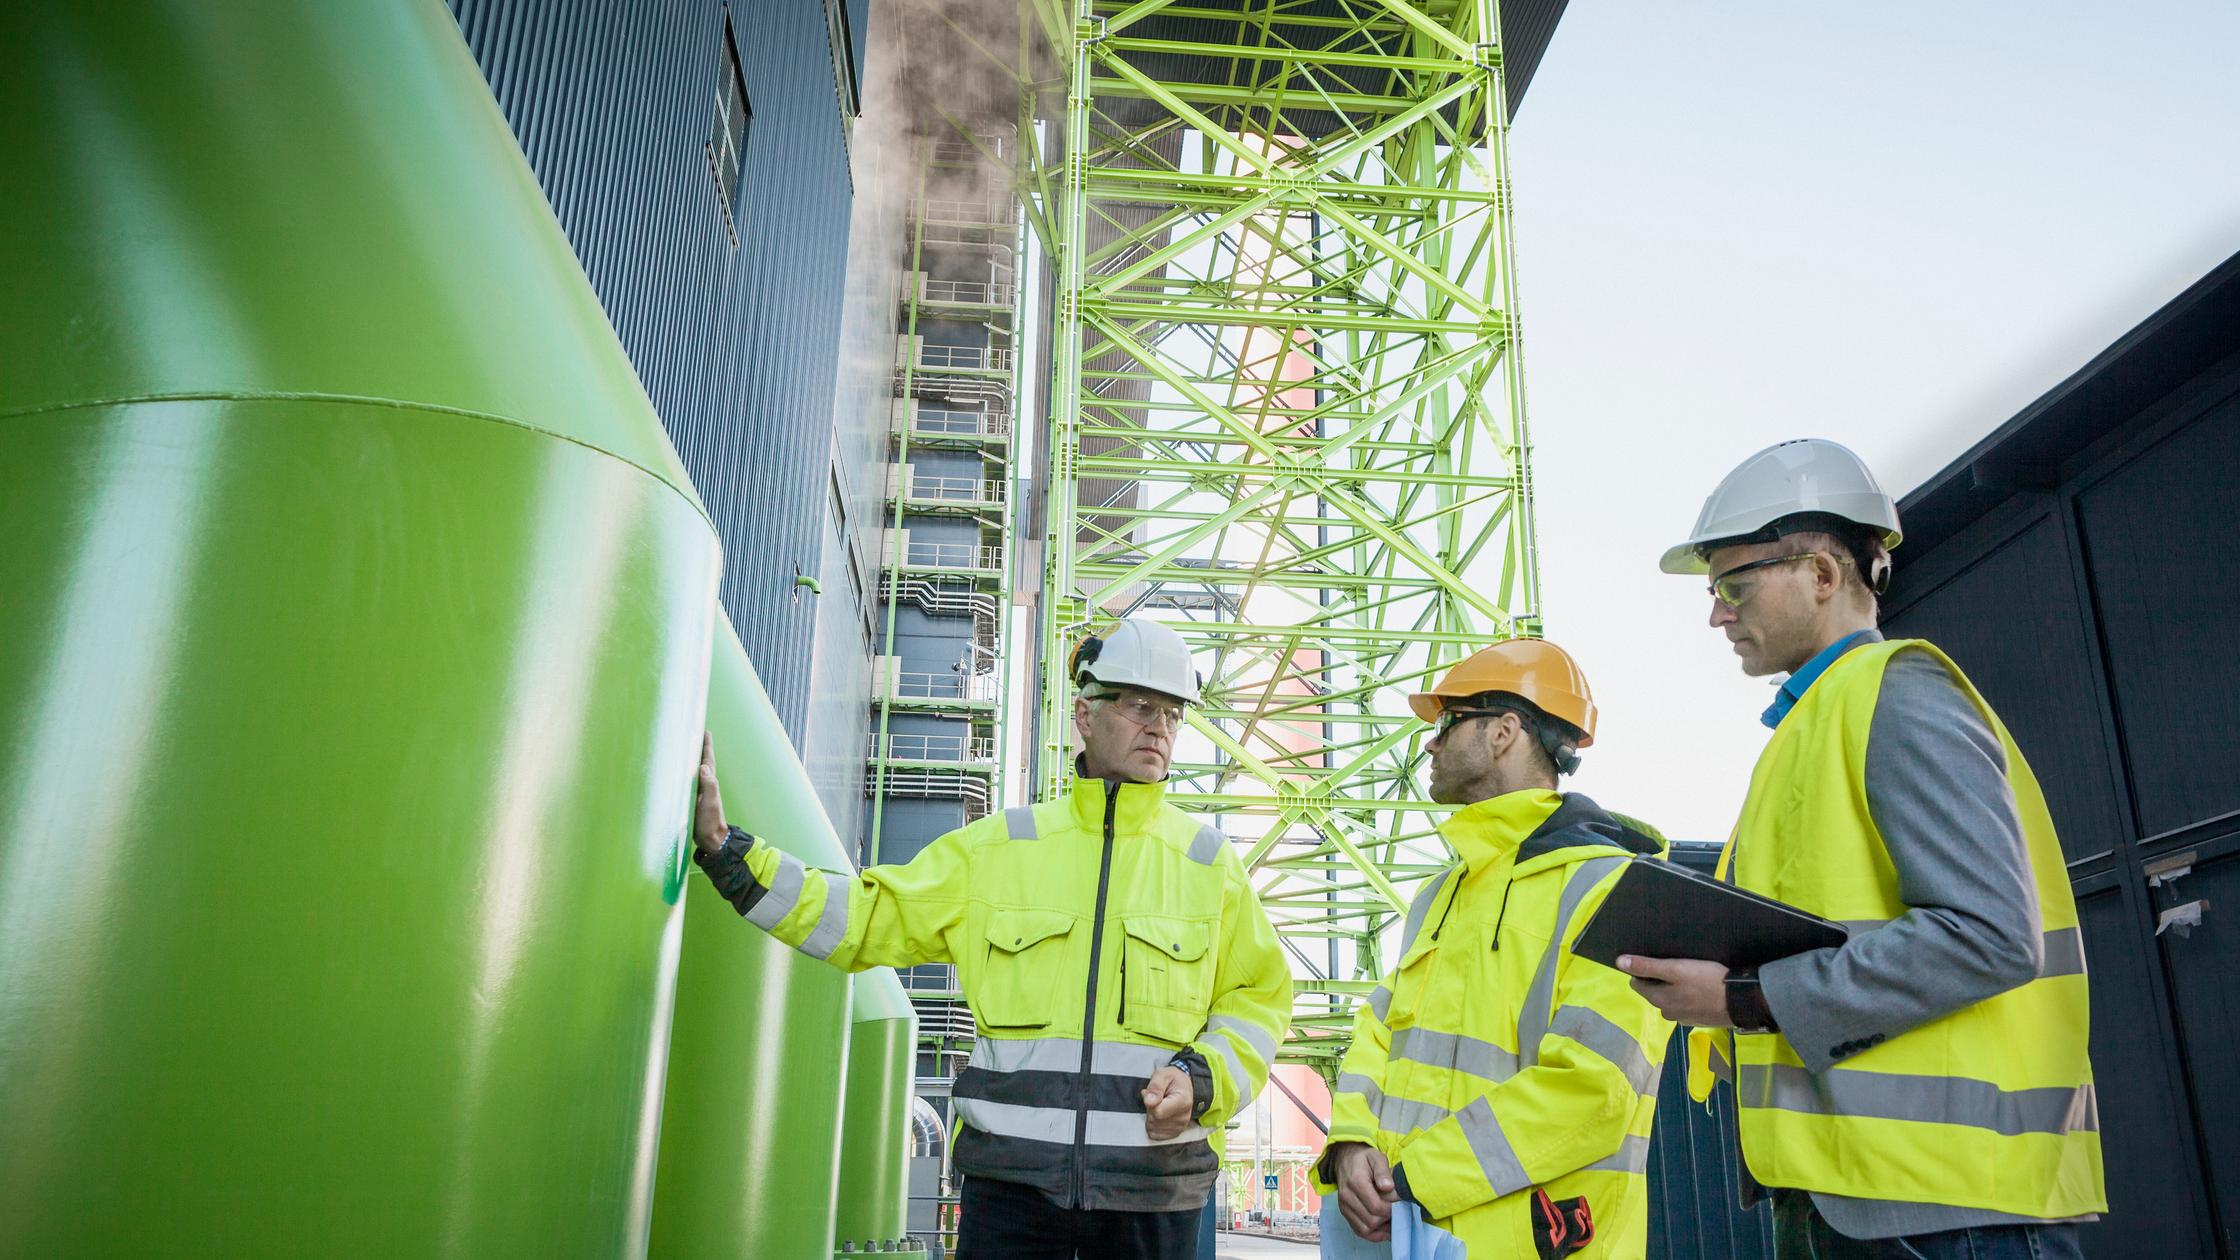 Innovation in Energy - Engineers on modern power station construction site